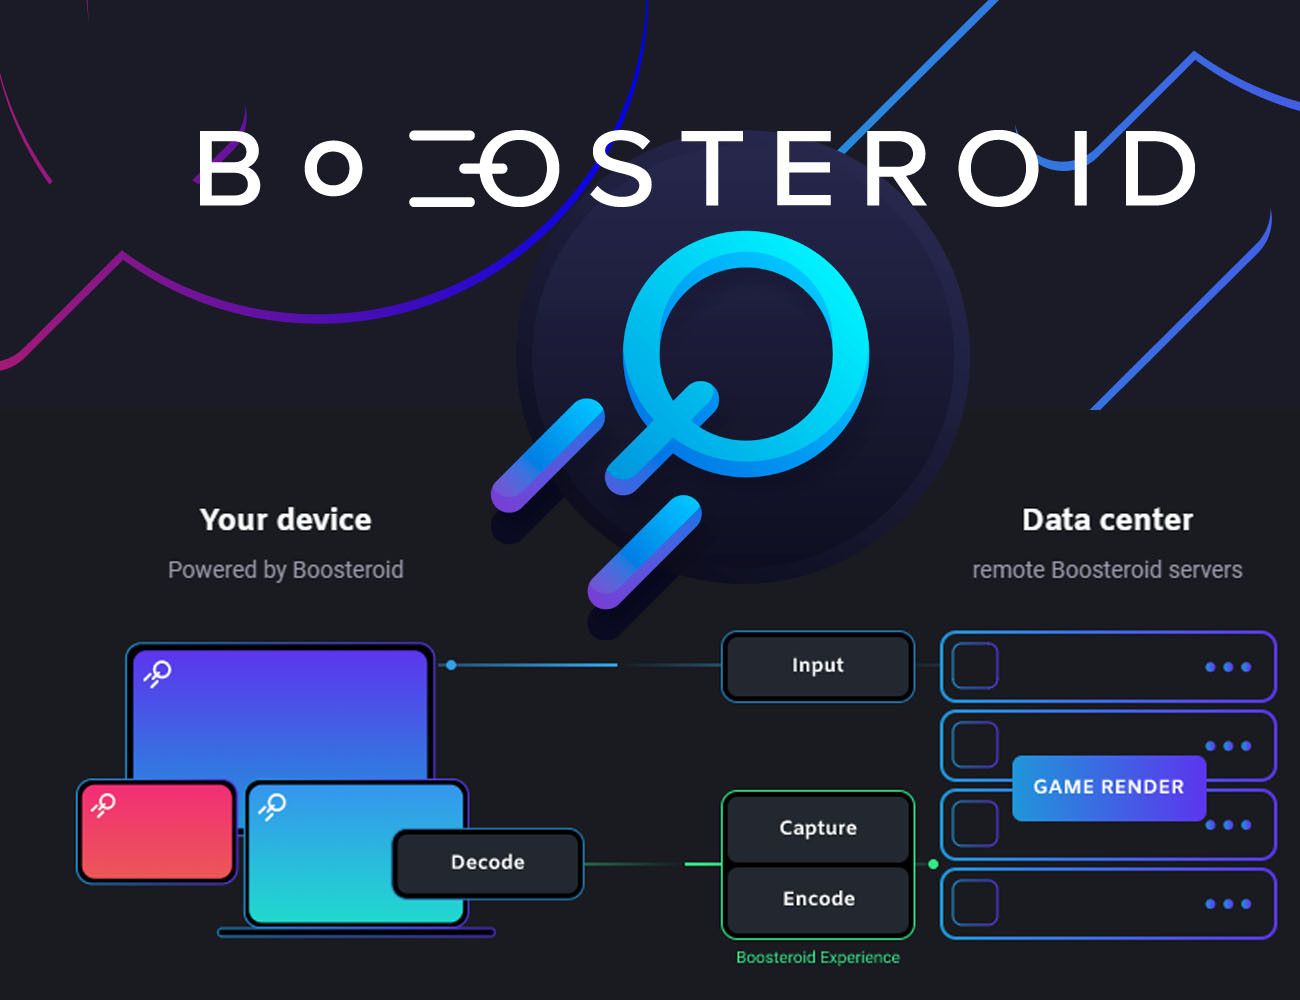 Boosteroid Review - Is This The Future Of Cloud Gaming? 